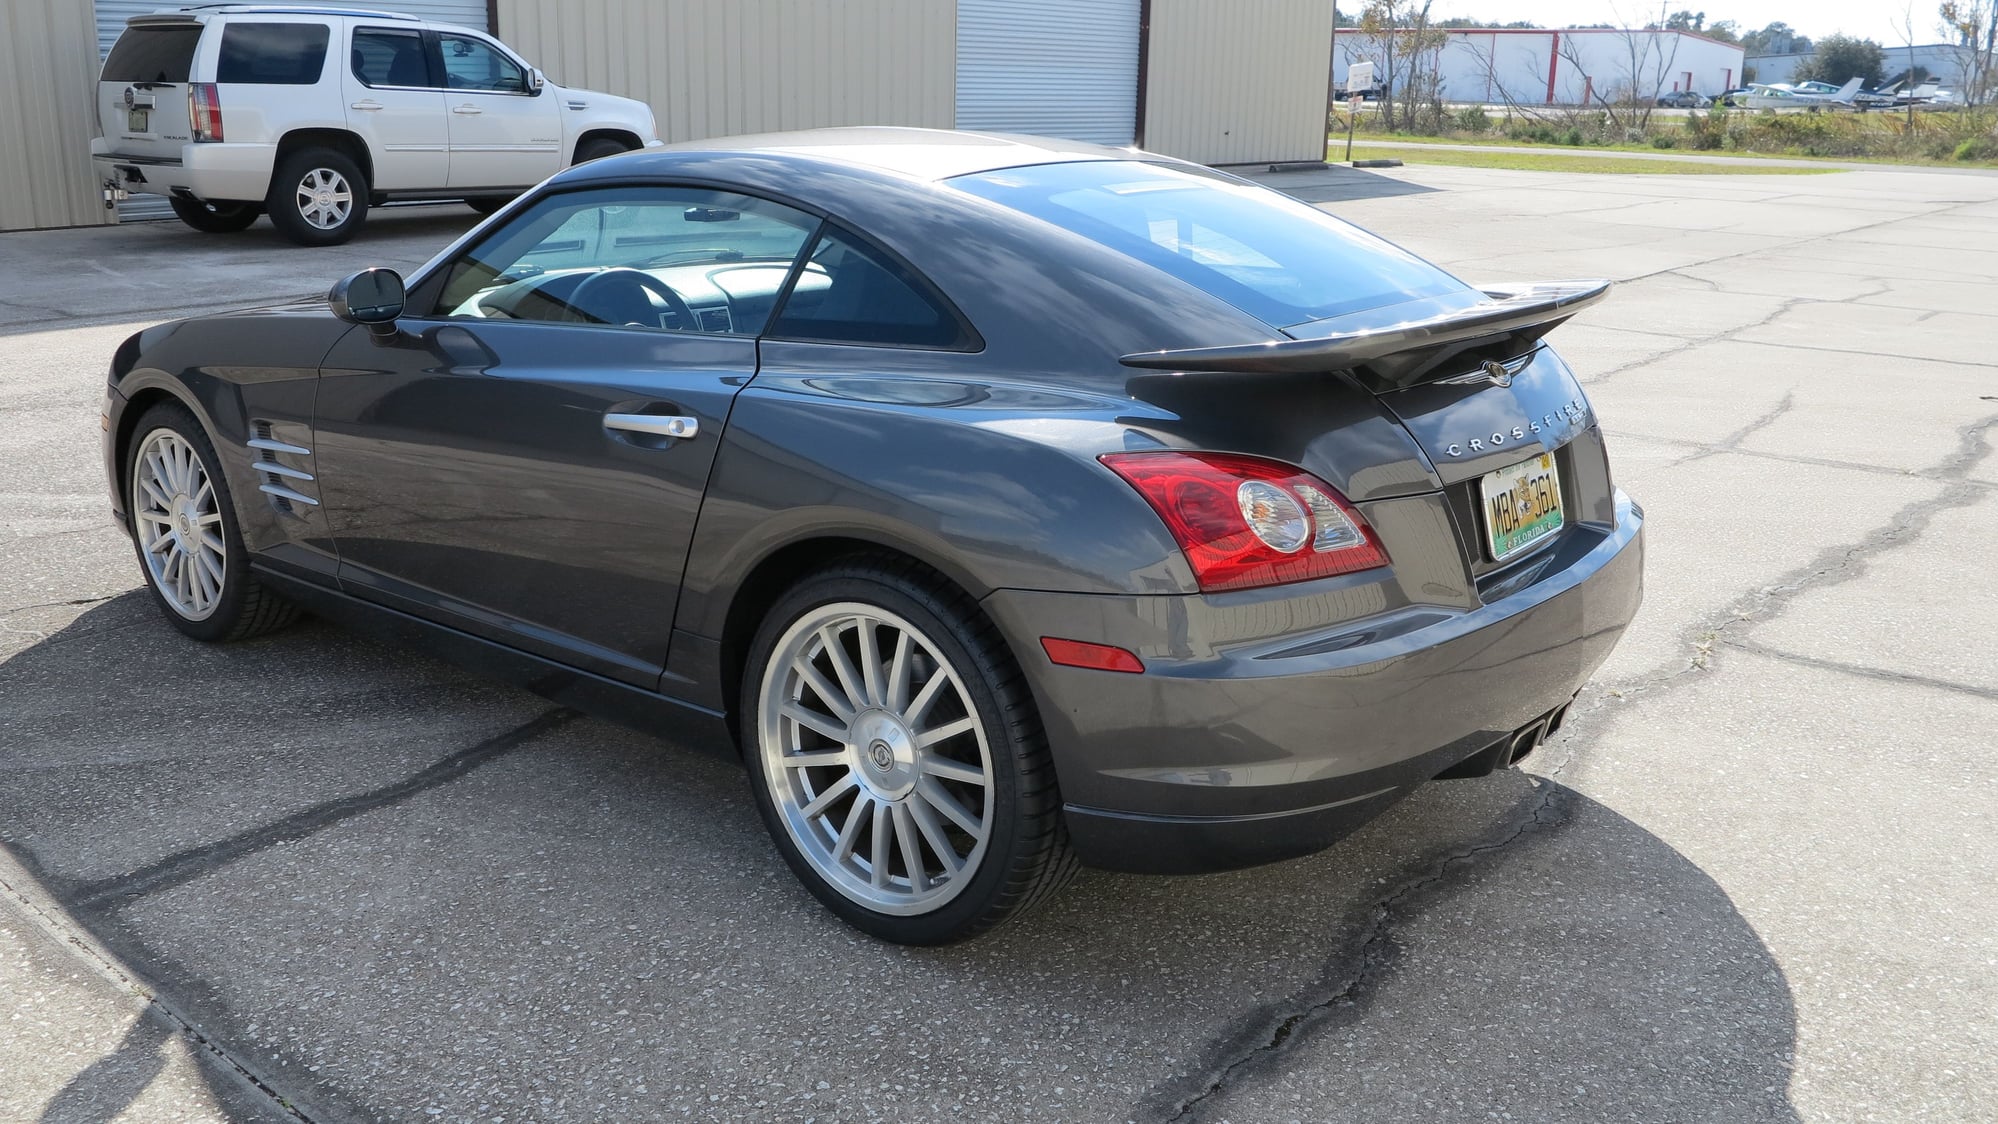 2005 Chrysler Crossfire - SRT 6 For Sale in Florida - Used - VIN 5X040344 - 42,052 Miles - 6 cyl - 2WD - Automatic - Coupe - Other - Edgewater, FL 32132, United States